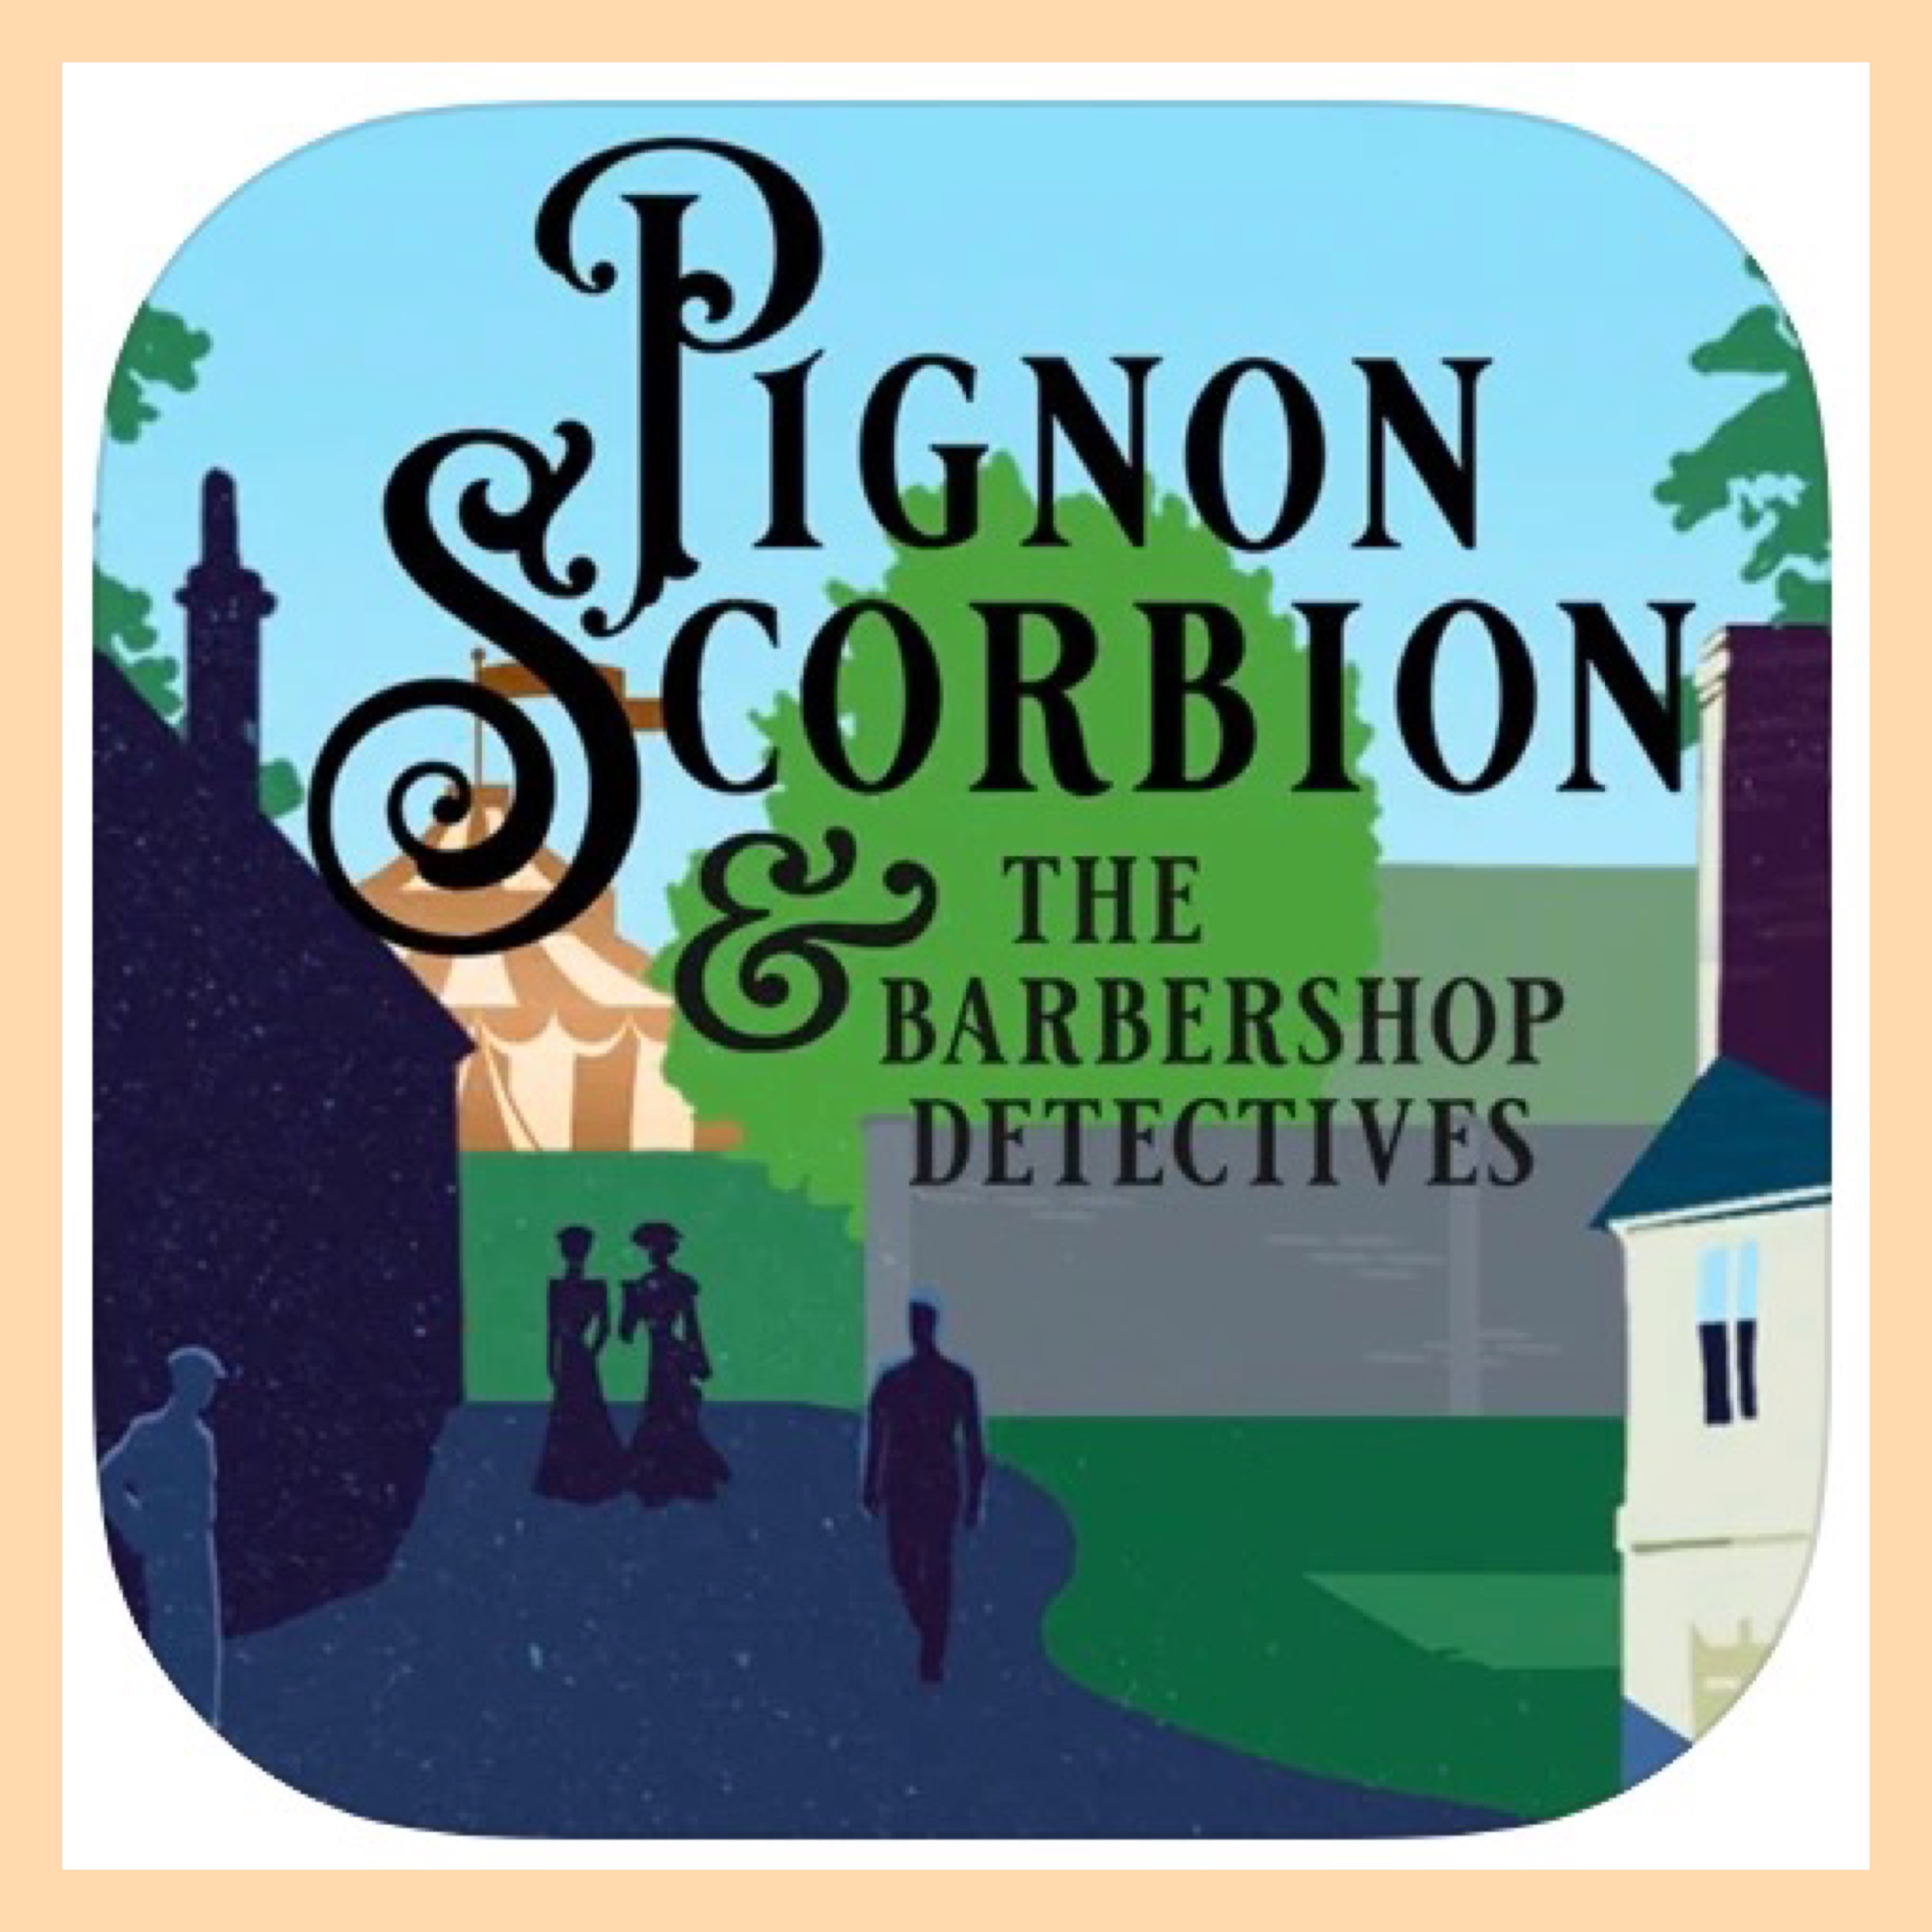 The Pignon Scorbion hidden-objects game app is based on this whodunit book by Rick Bleiweiss, and is free in both the Apple and Google Play App Stores.